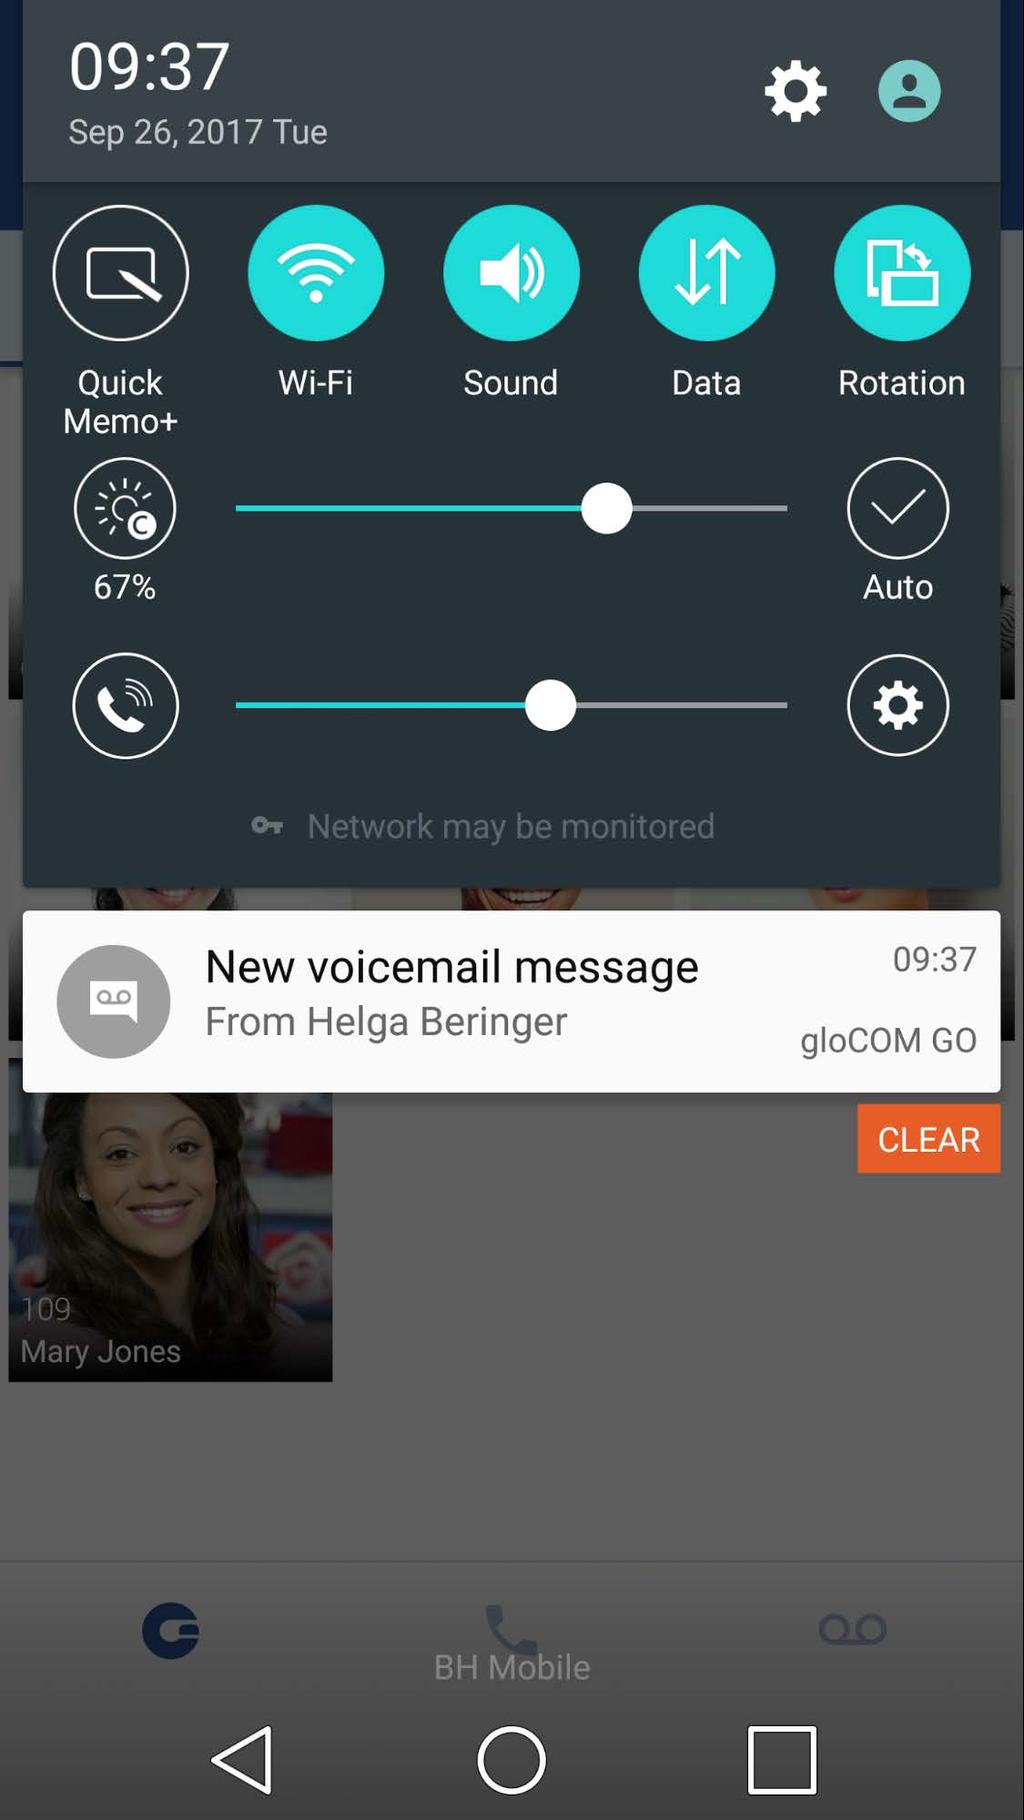 Voicemail management With glocom GO you can listen to new